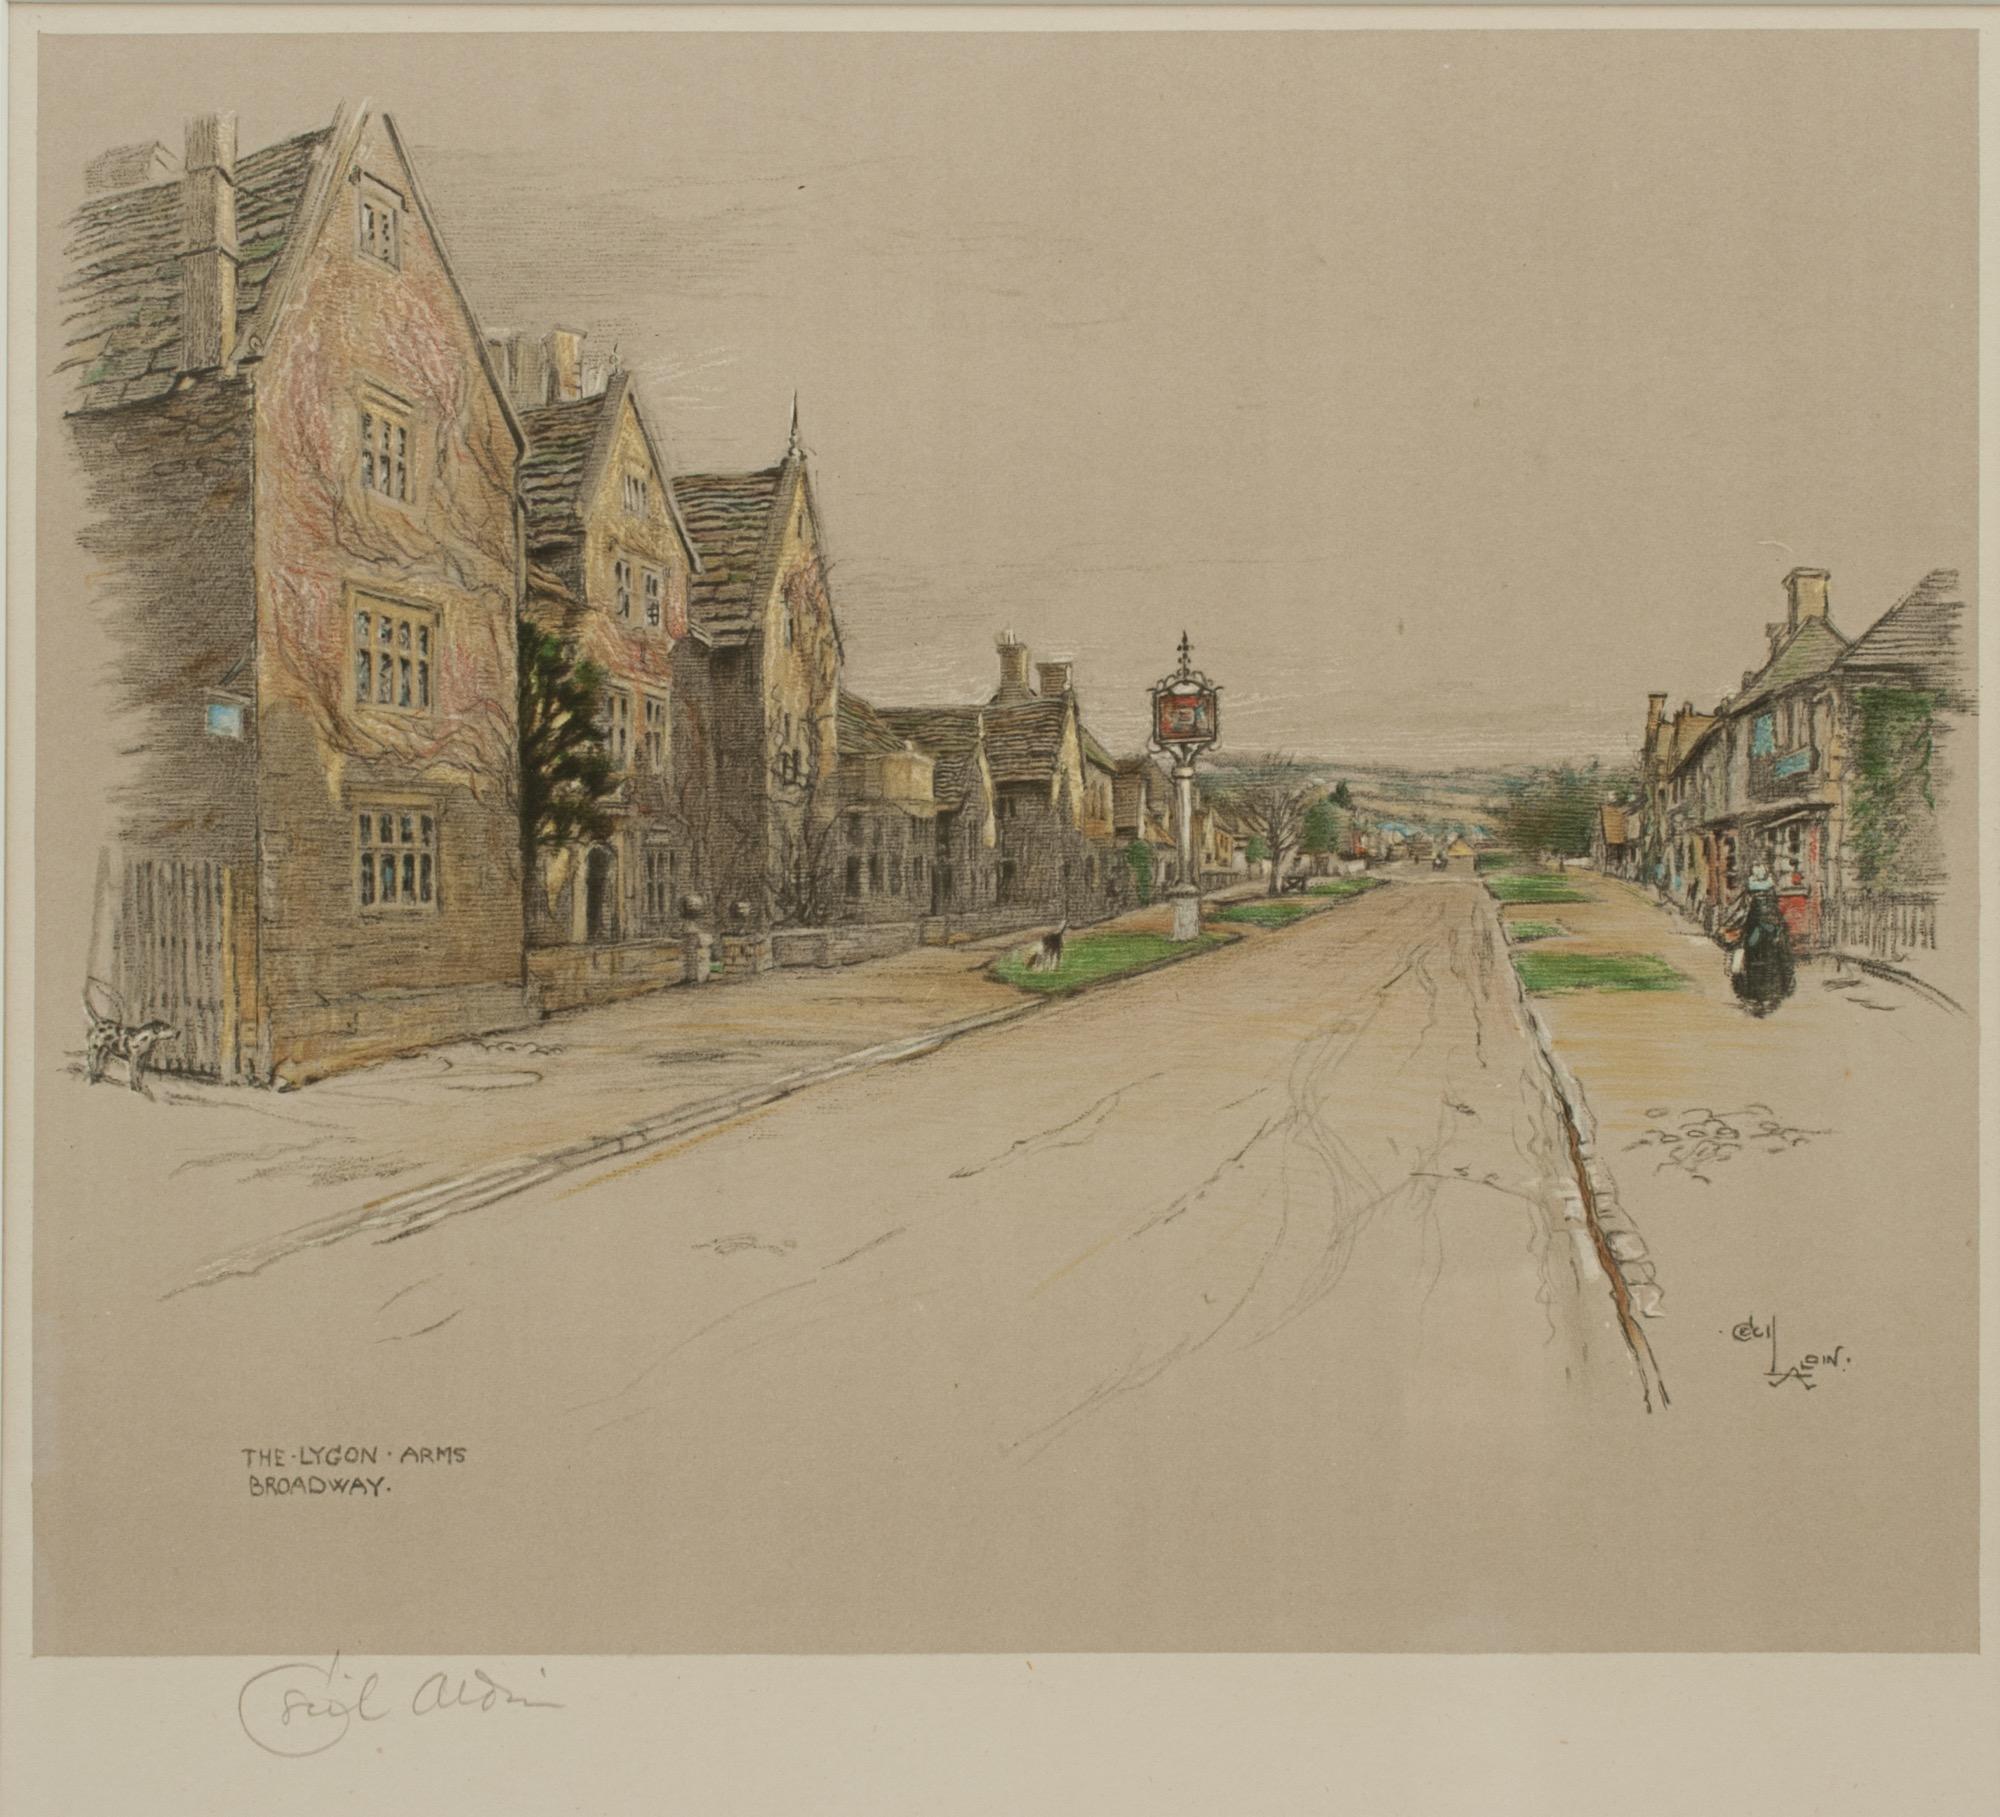 Early 20th Century Antique Print, The Lygon Arms, Broadway by Cecil Aldin